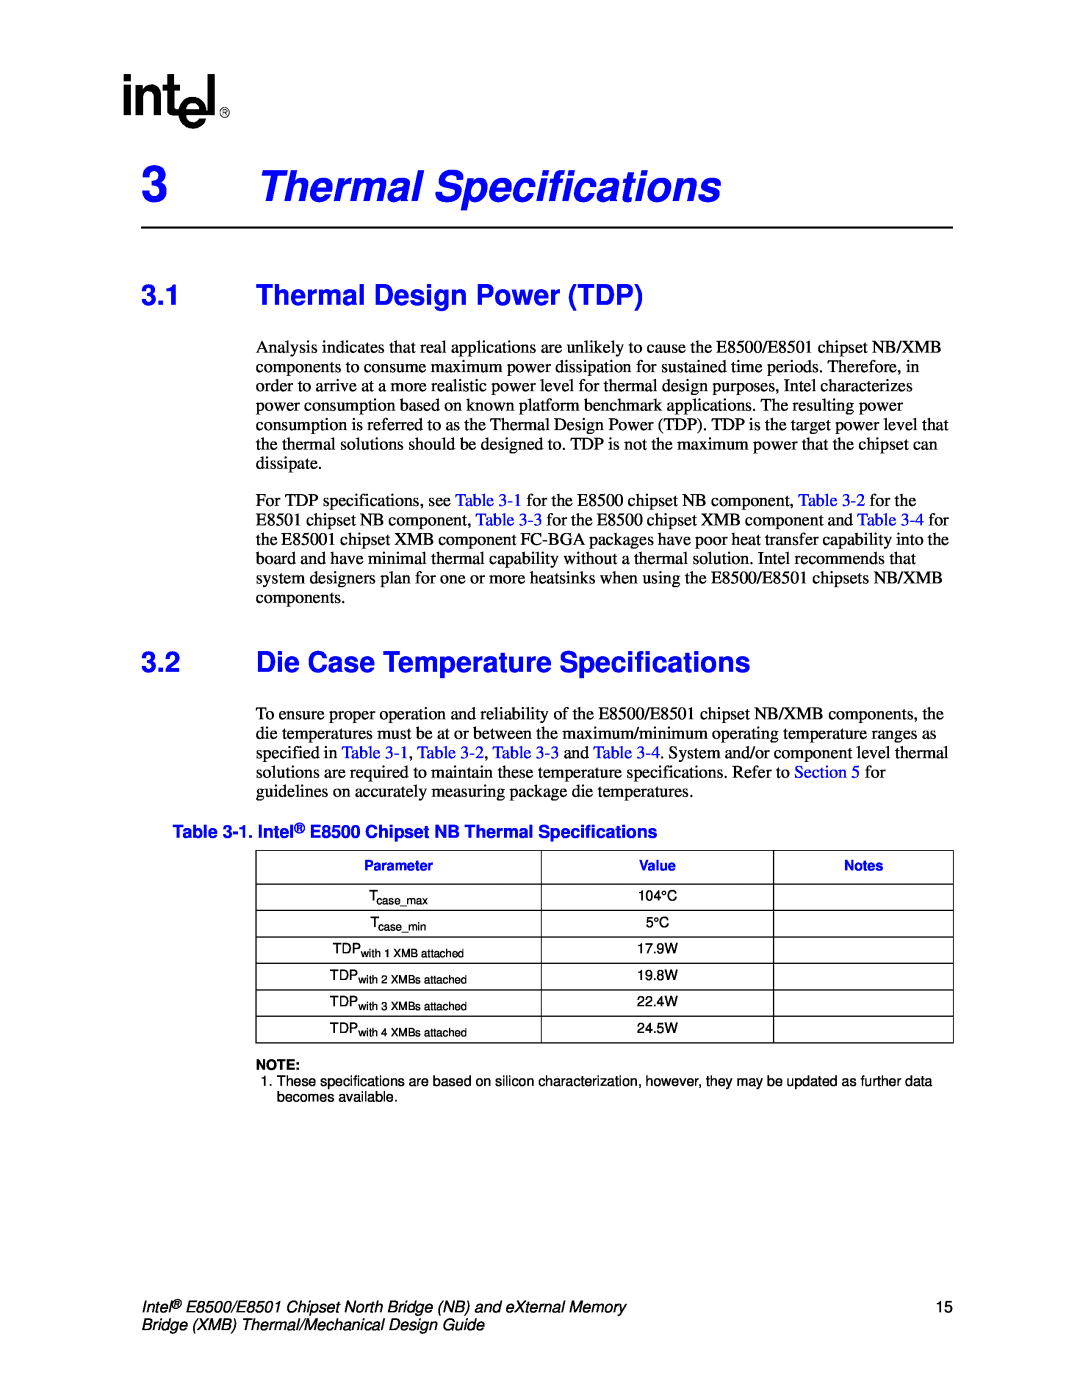 Intel E8501 manual 3Thermal Specifications, 3.1Thermal Design Power TDP, 3.2Die Case Temperature Specifications 